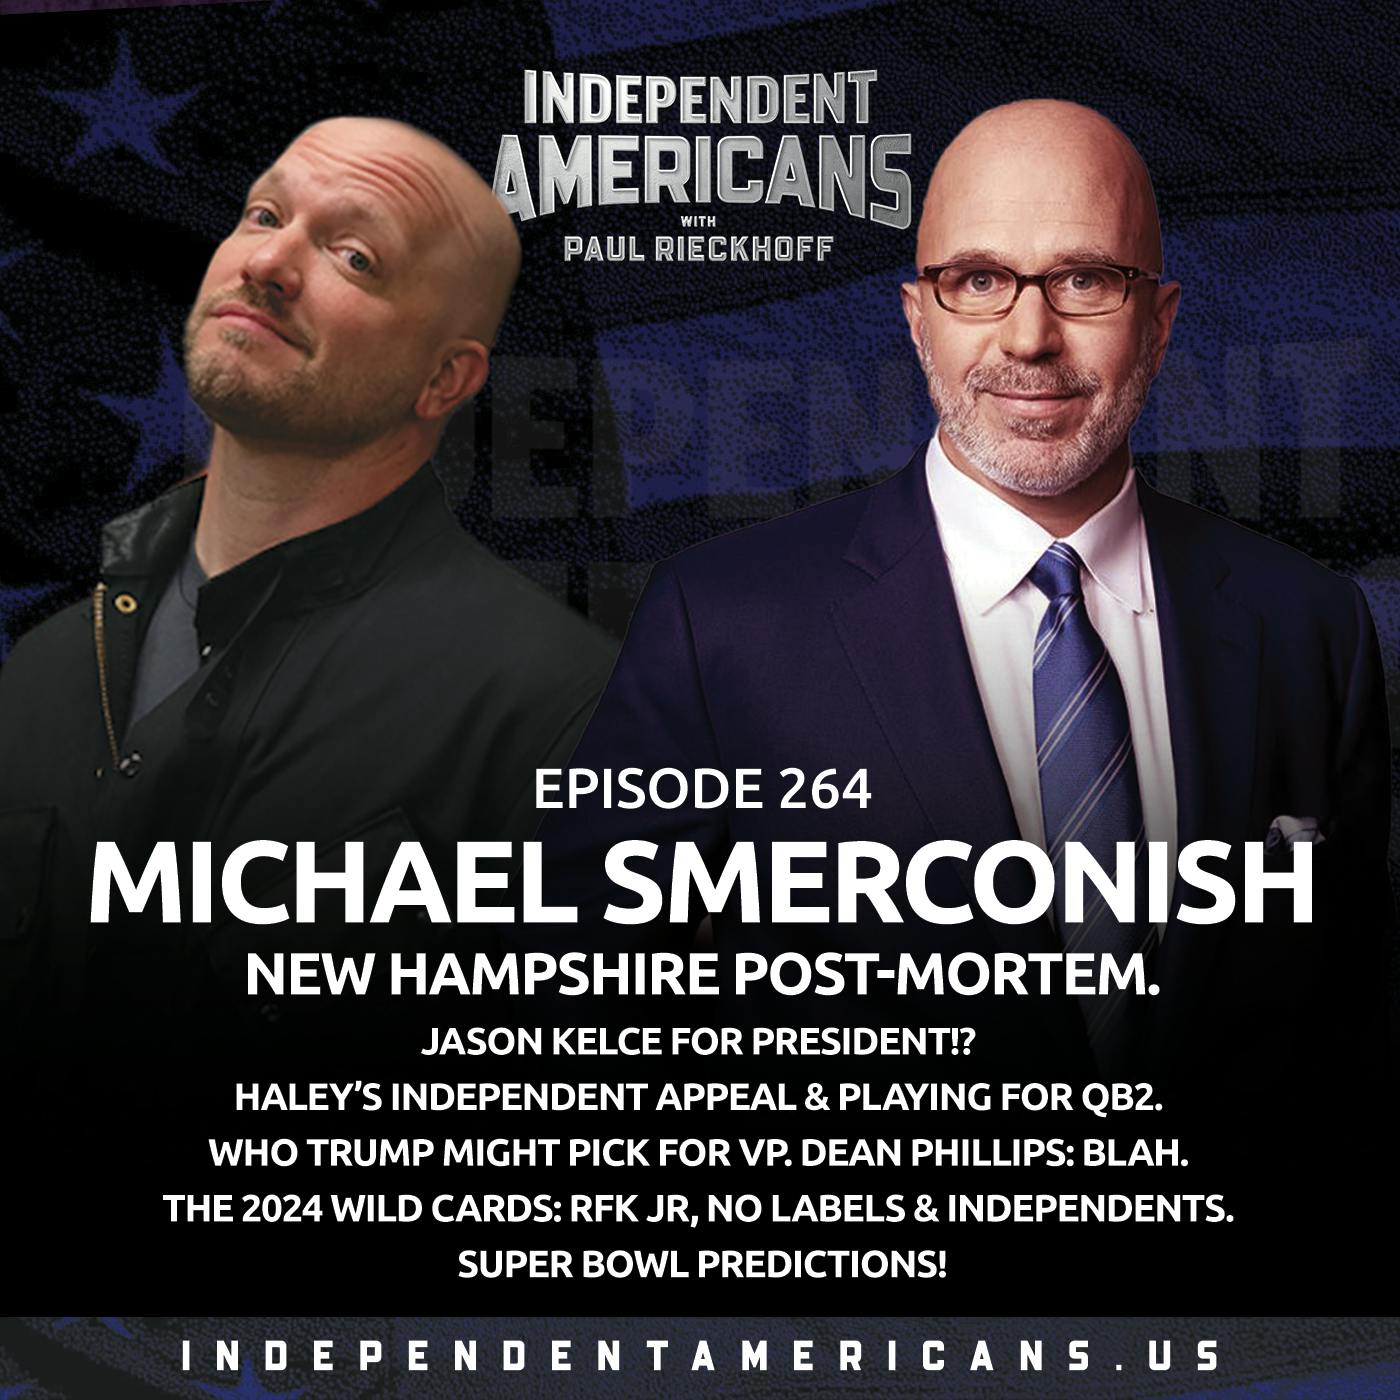 264. Michael Smerconish. New Hampshire Post-Mortem. Jason Kelce for President!? Haley’s Independent Appeal & Playing for QB2. Who Trump Might Pick for VP. Dean Phillips: Blah. The 2024 Wild Cards: RFK Jr, No Labels & Independents. Super Bowl Predictions!